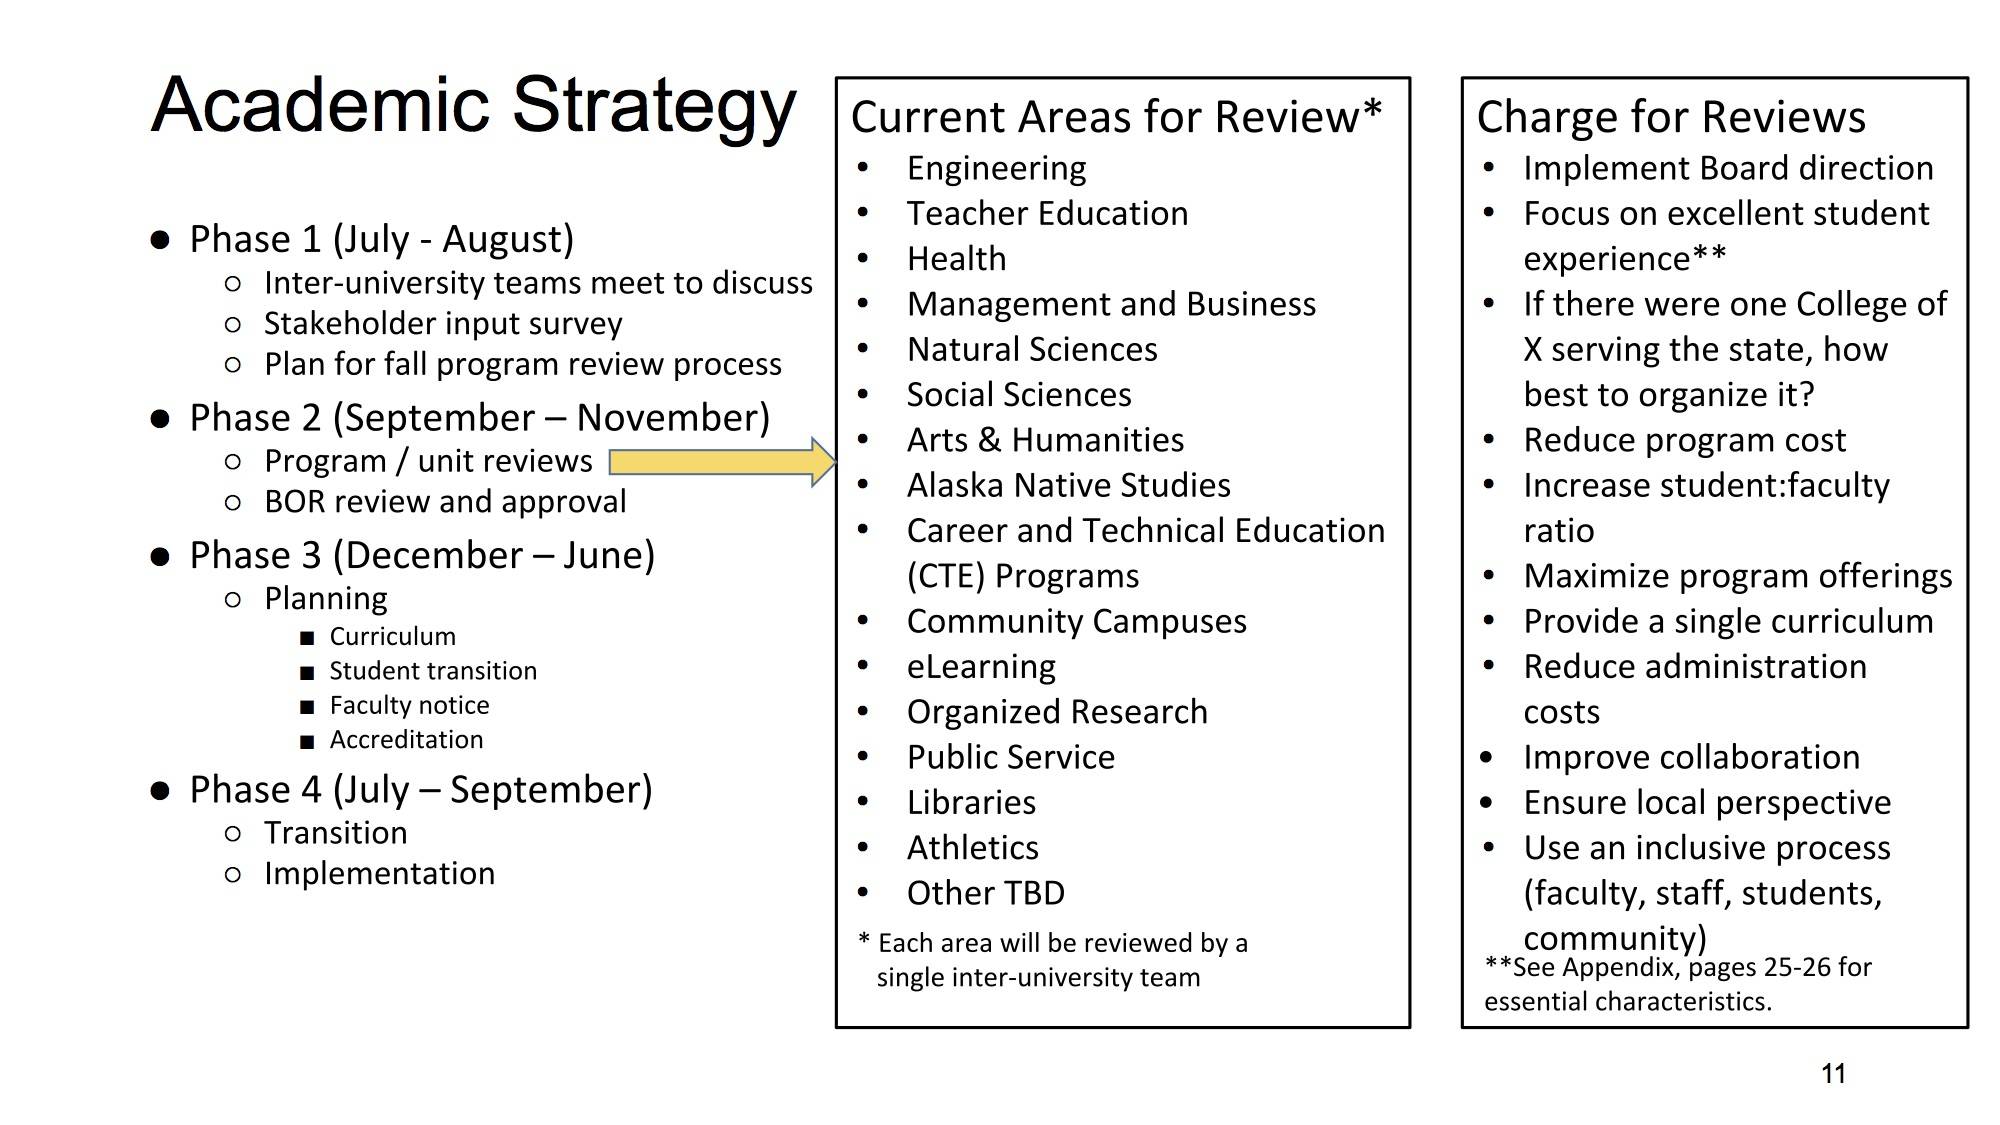 A slide from the Regents meeting showing current areas for review and a timeline for implementation.